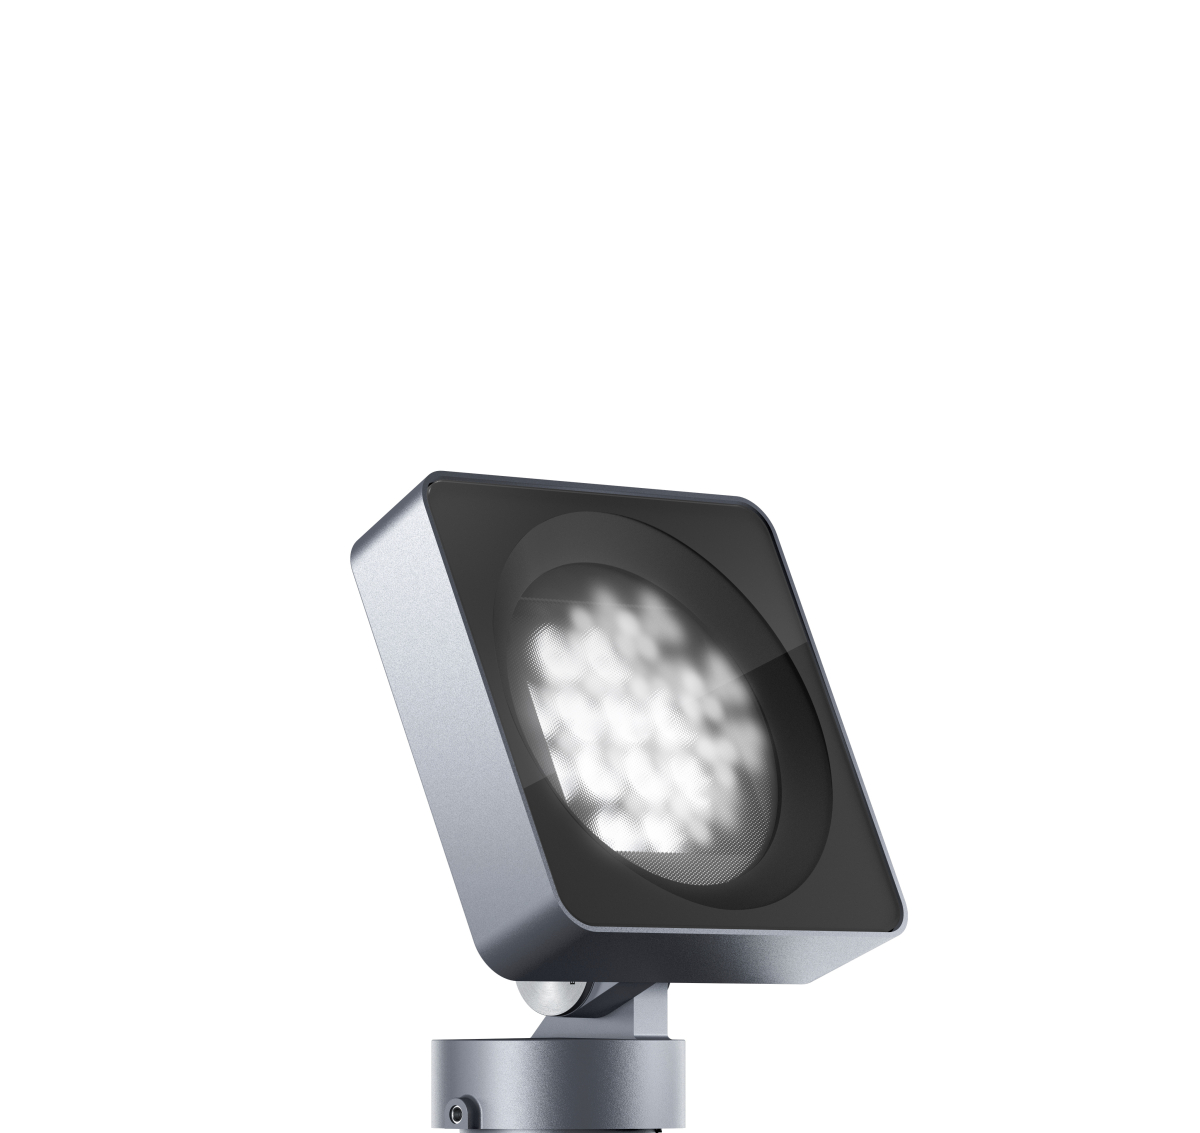 Lightscan IP65 Surf Mtd Floodlight With Mounting Plate Oval Flood Beam 48W LED 4000K ECG Graphit M